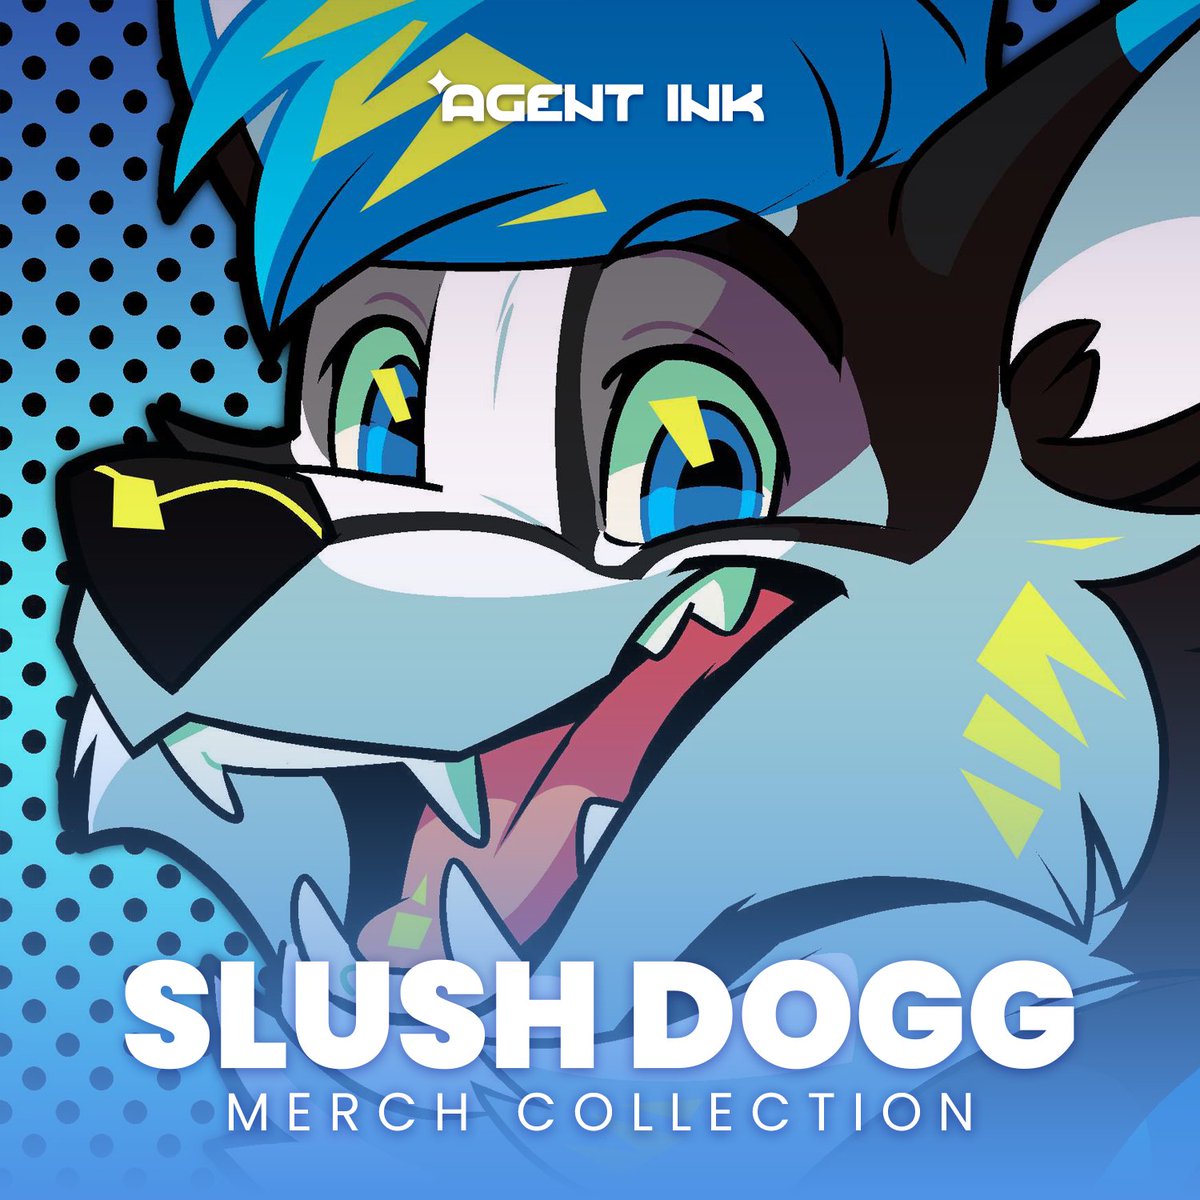 New partner announcement! @slush_dogg's merch collection is available now. Take a peek 👇👀 agentink.gg/collections/sl… #AgentInk #FanMerch #VTuberUprising